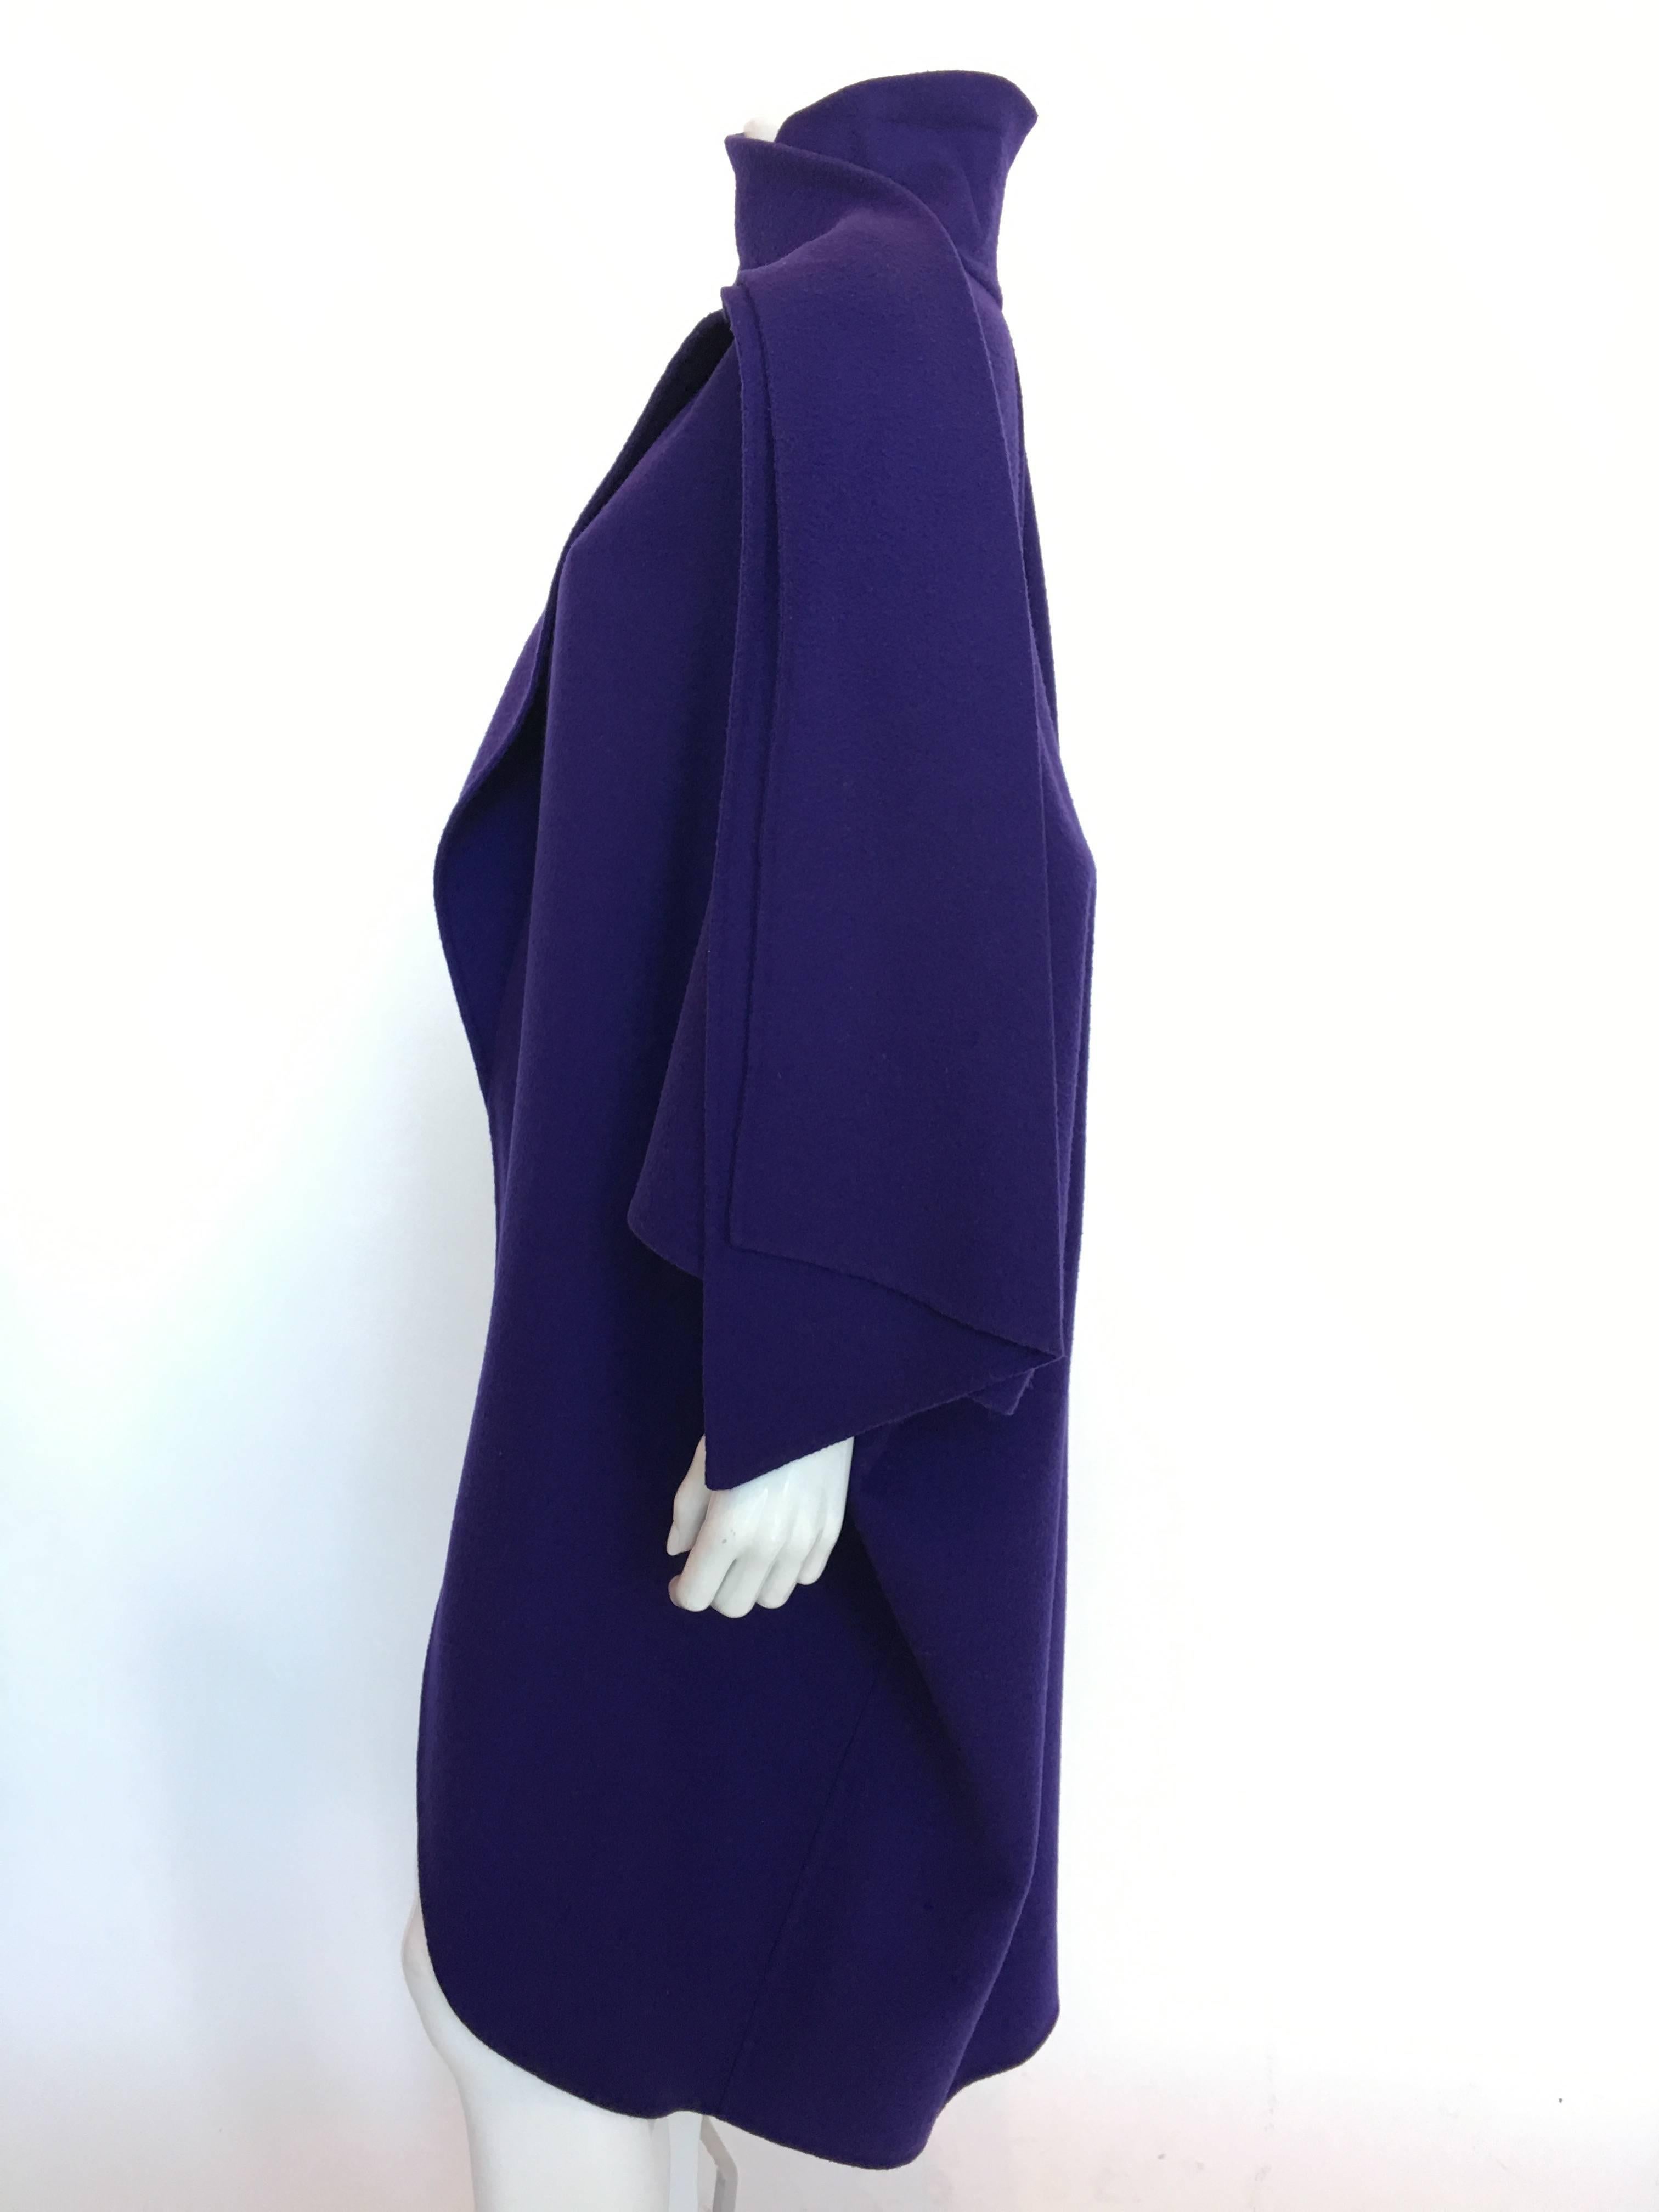 Ferragamo Purple Wool Cape Style Coat with a wrap tie at neck.
Circa 1980's 
I Magnin Department Store
Two tiny holes near left arm opening  (see picture)

*MEASUREMENTS* 
Size tag - Medium
Length (from back collar seam to bottom) - 44